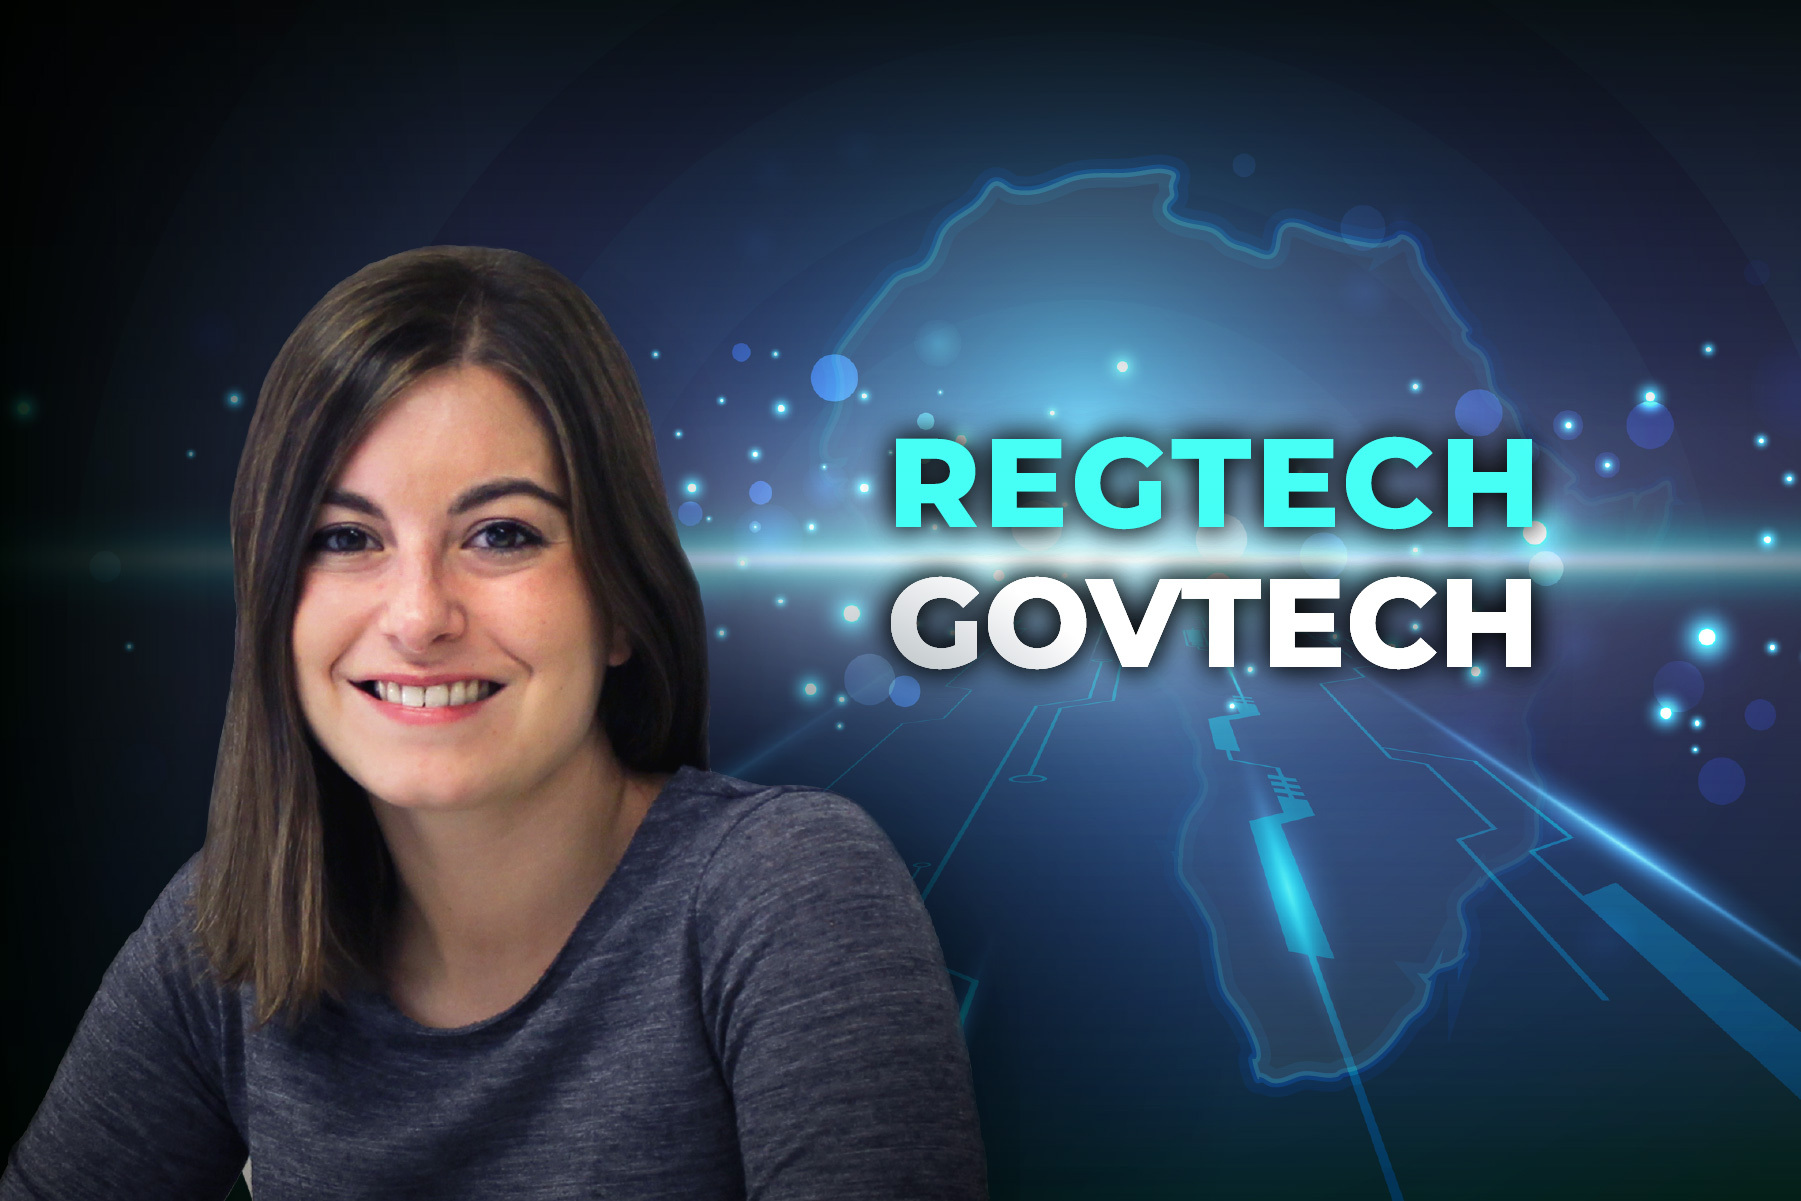 RegTech and GovTech innovation in Africa